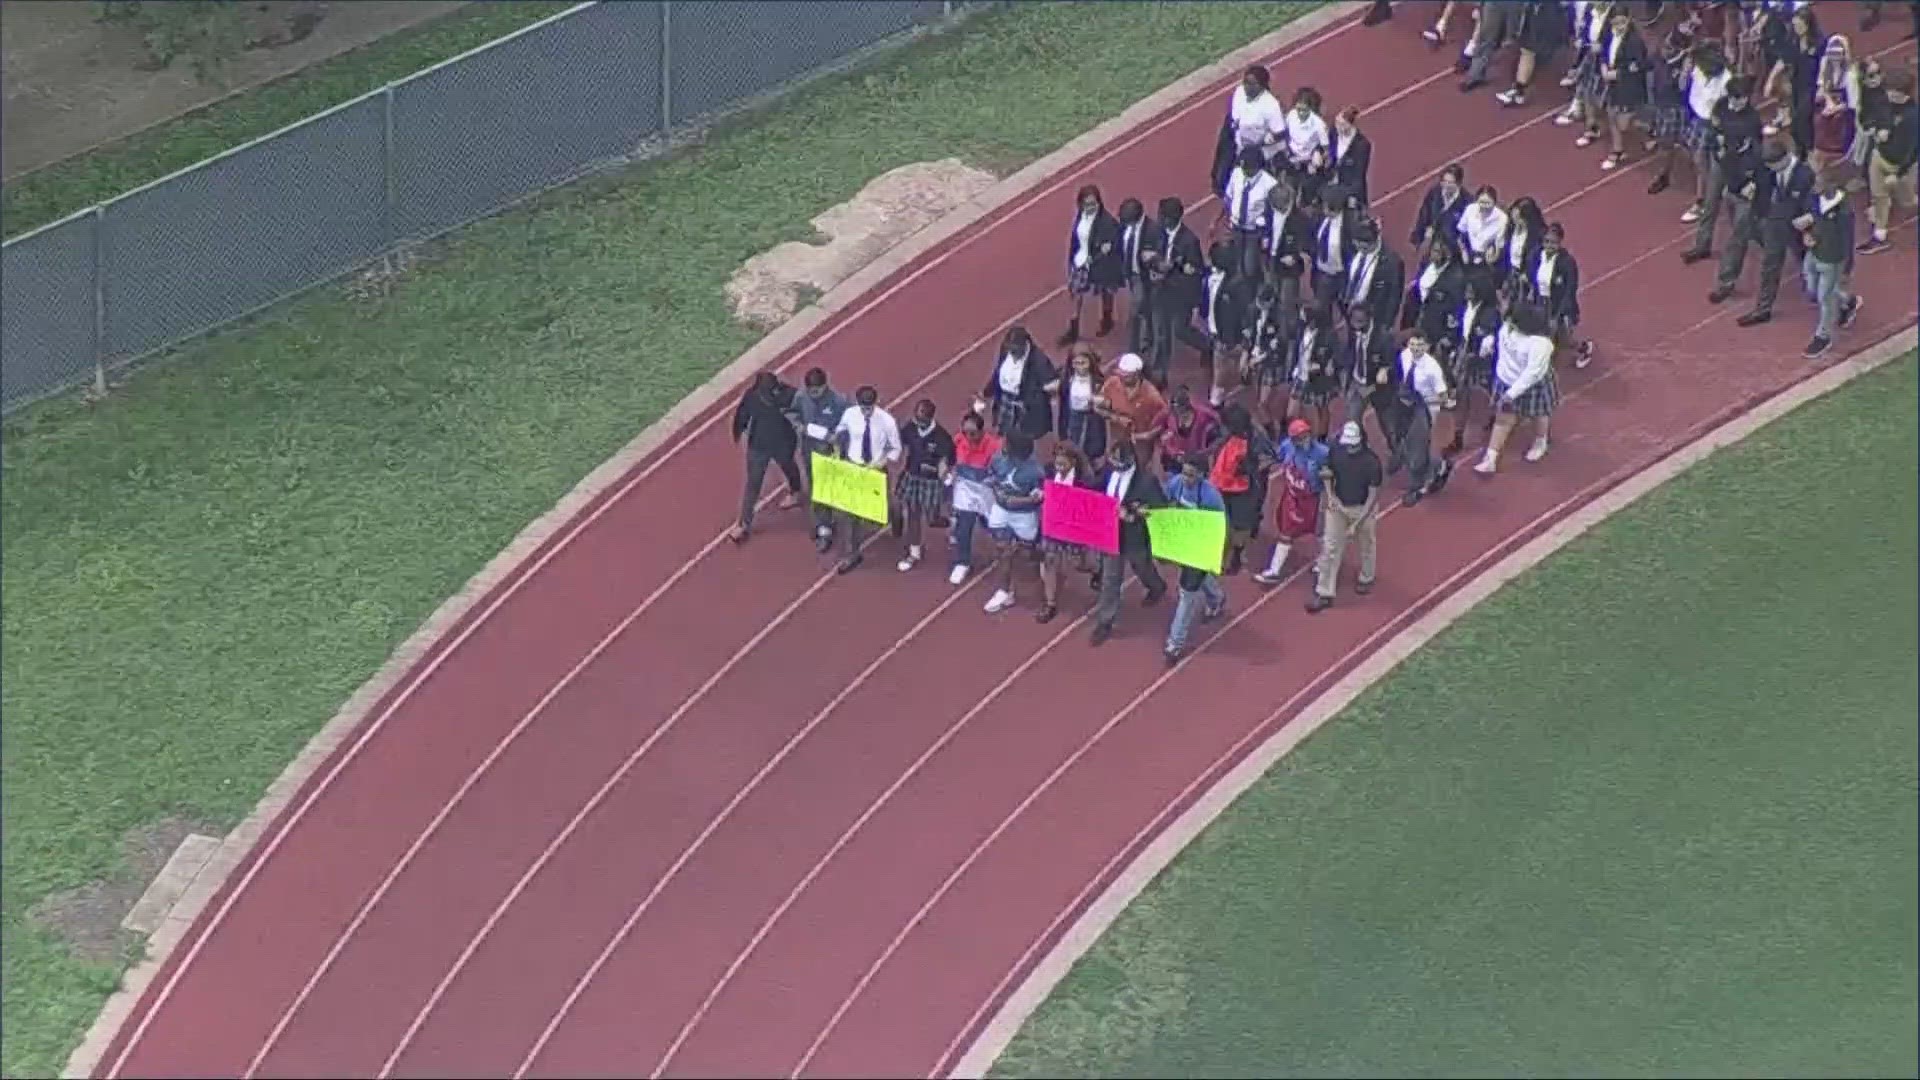 Nearly 100 students from Bishop Dunne Catholic School in Dallas were among those who participated in school walkouts on Thursday, May 11.